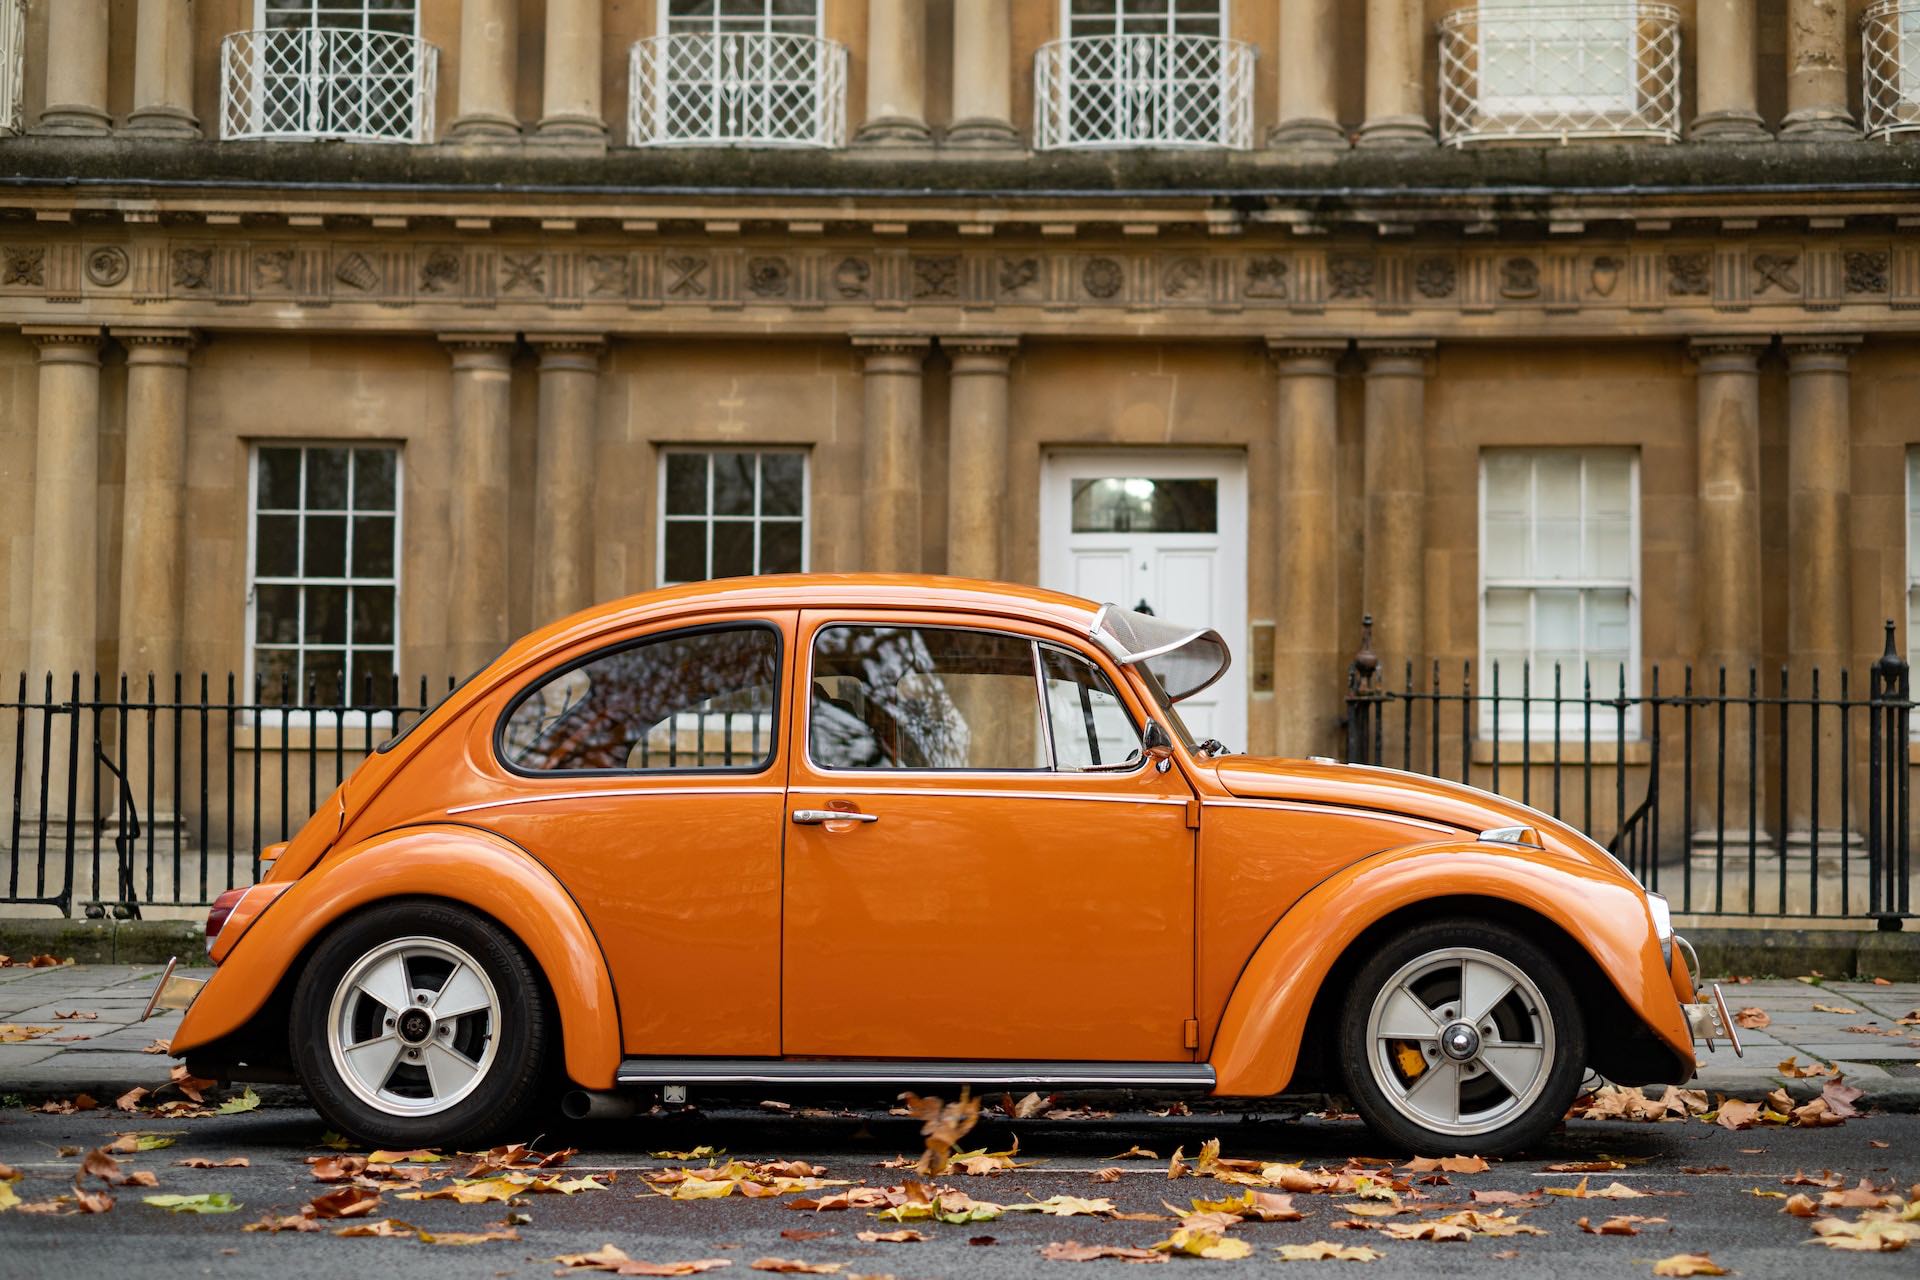 6. Volkswagen Beetle: More Than Just a Car, It's a Cultural Phenomenon